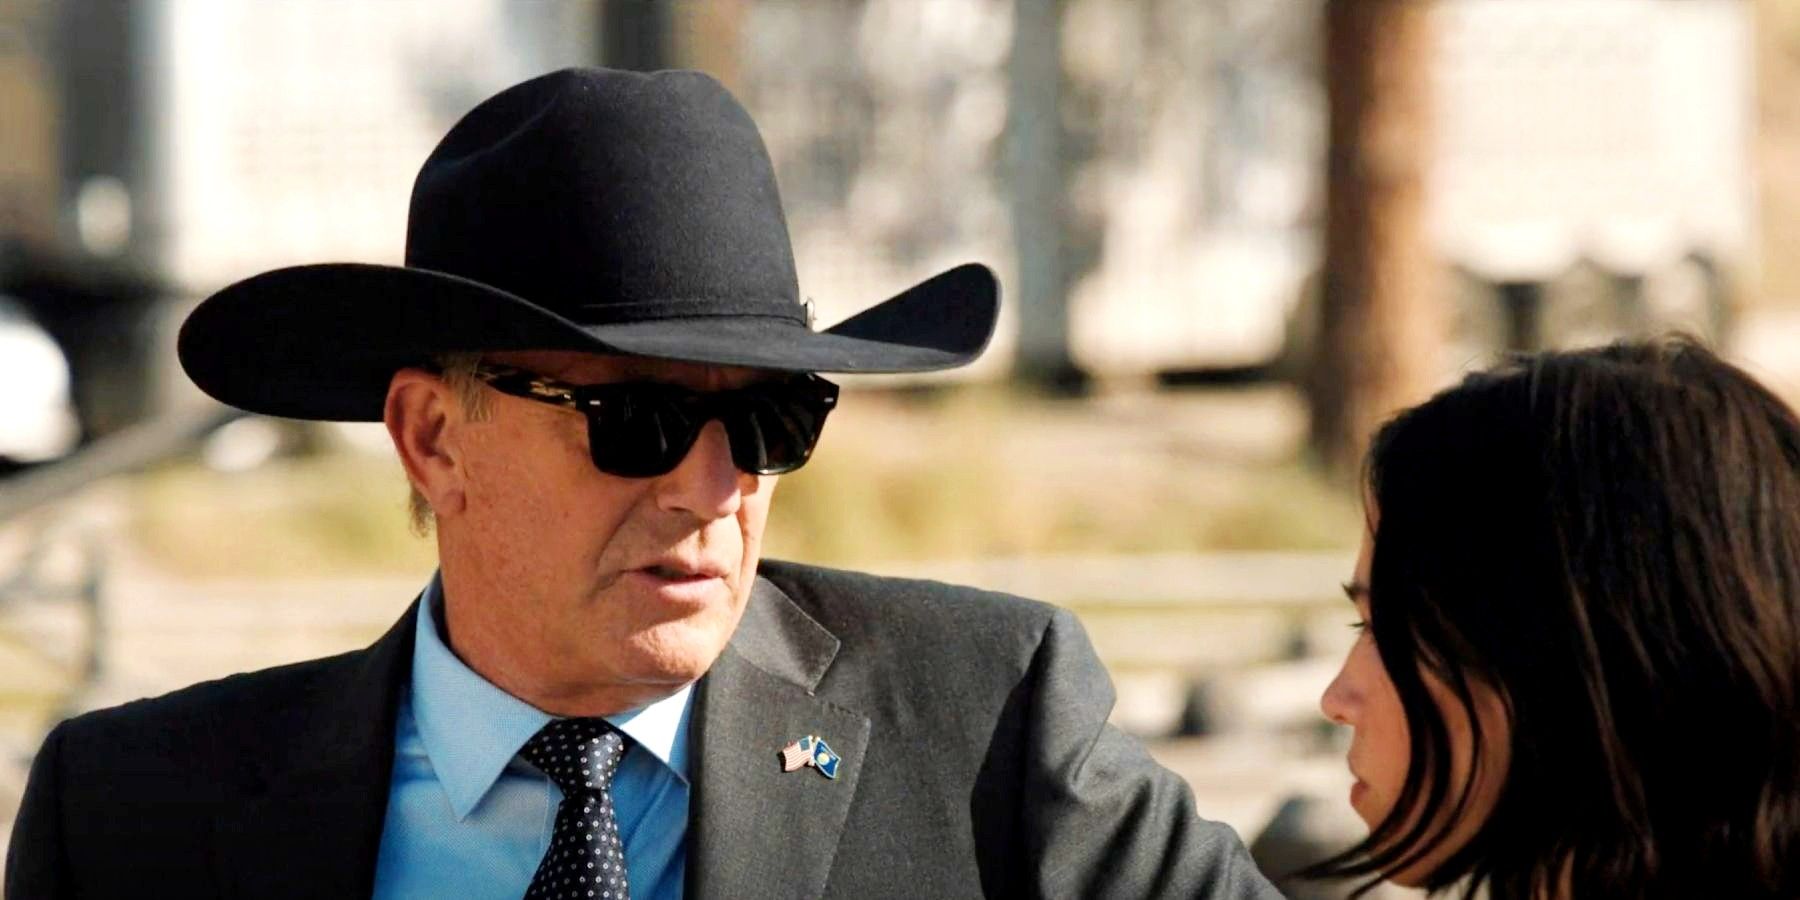 Kevin Costner as John Dutton wearing a cowboy hat and sunglasses in Yellowstone season 5 episode 8